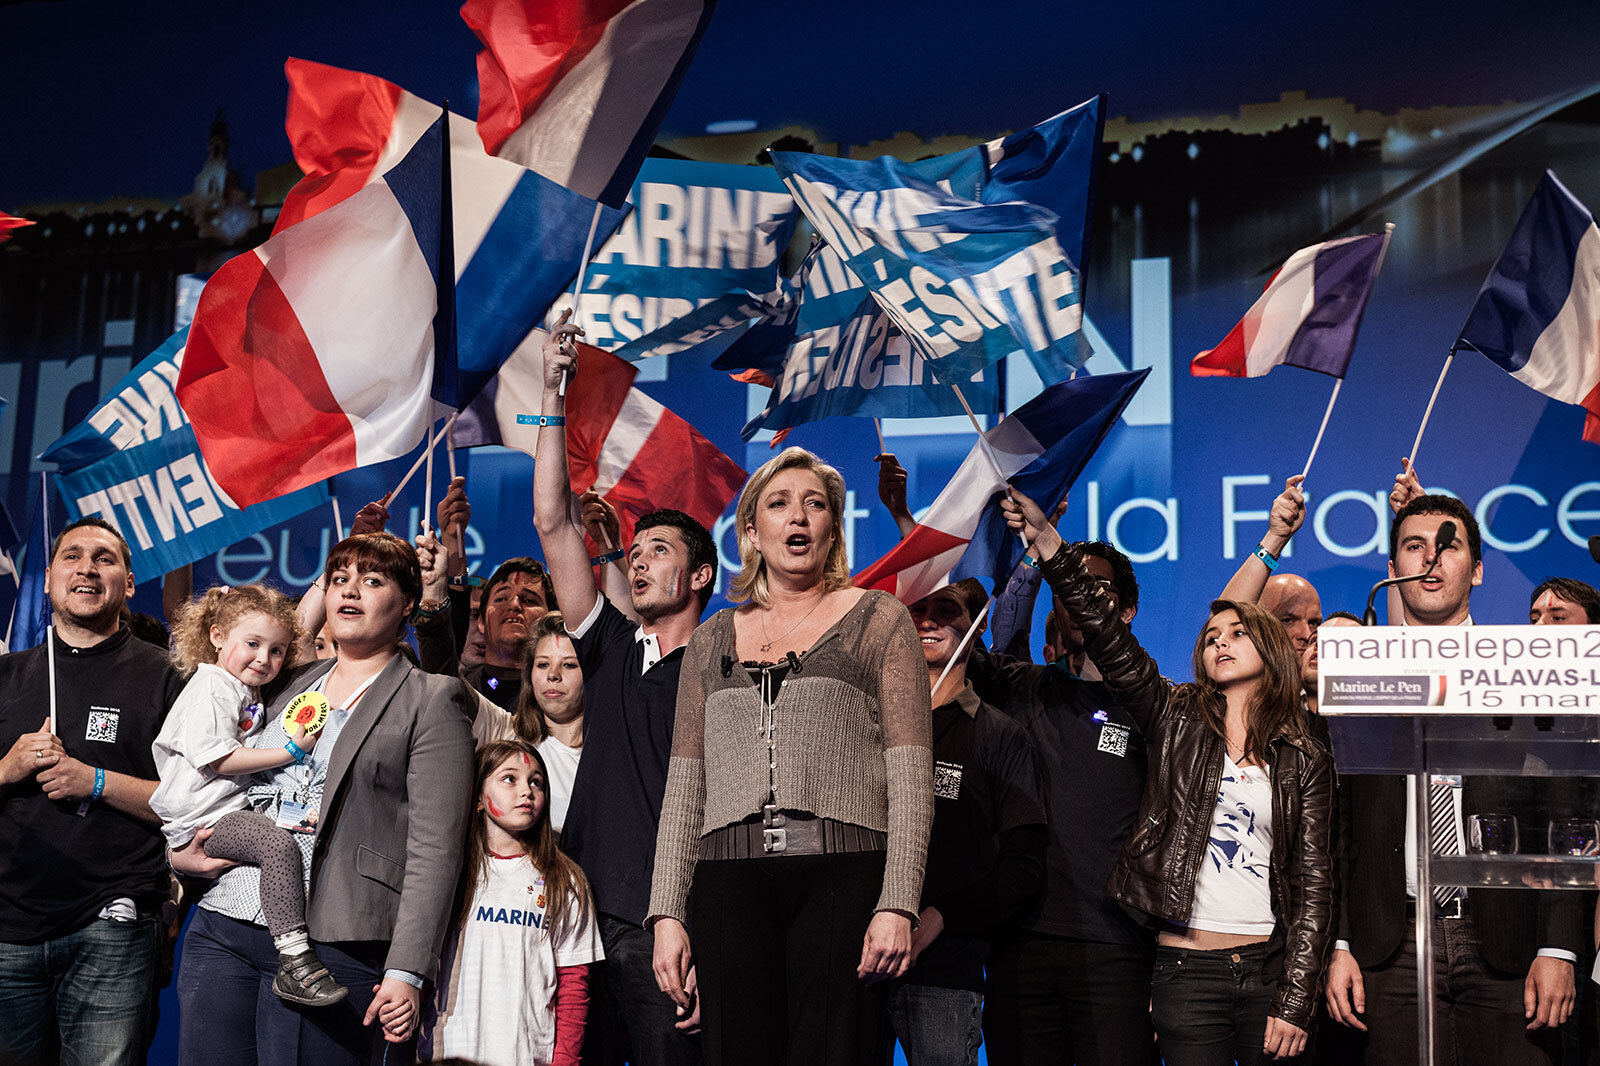  National Front’s Marine Le Pen attends a rally during the campaign for the French presidential election on Mar. 2012 in Palavas-les-Flots, France. 